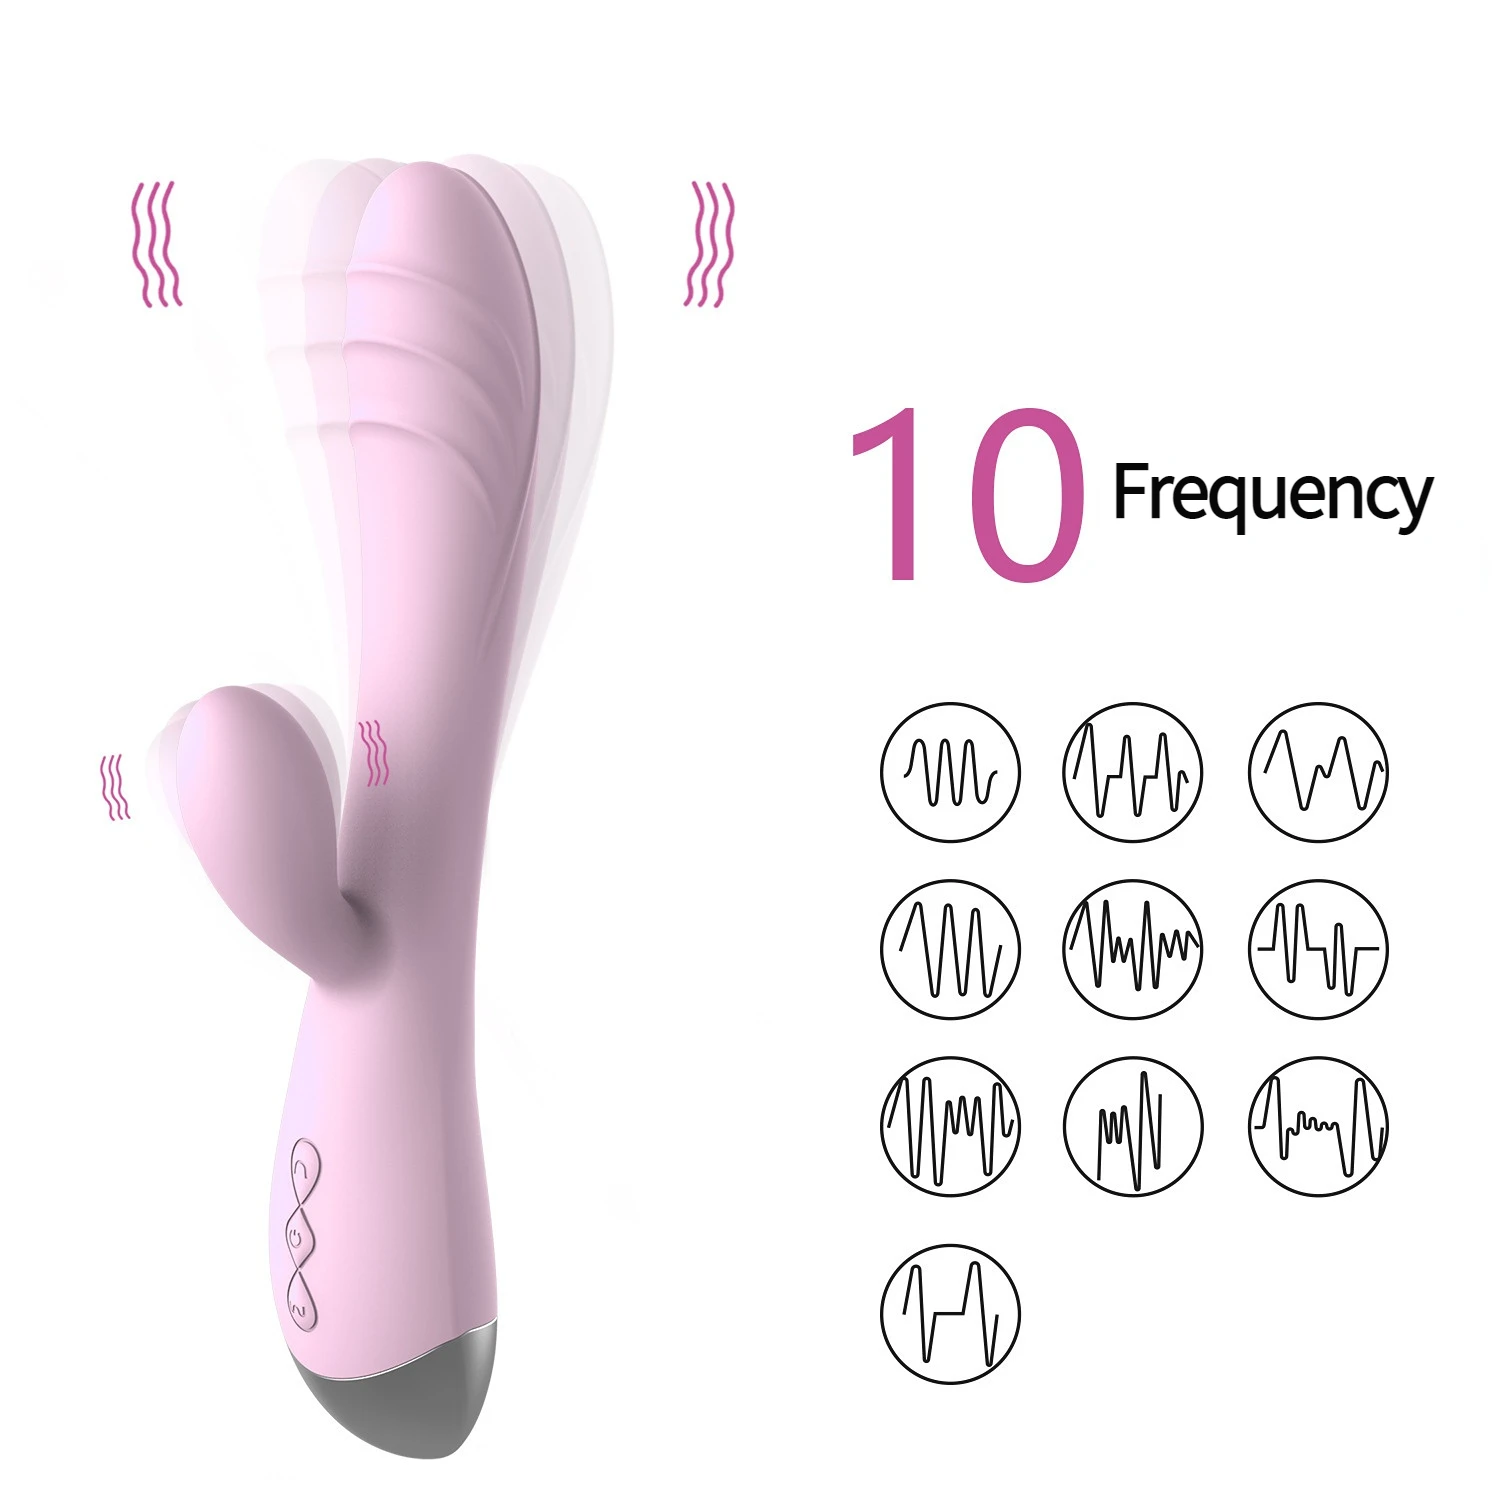 China Factory Wholesale 10 Frequency G-spot Dildo Vibrator for Women Clitoral Stimulator Wear Vibrating Egg Clit Female Panties Sex Toys for Adults 18 Sd20b572c95a441e99ee42fad2e4fbf785